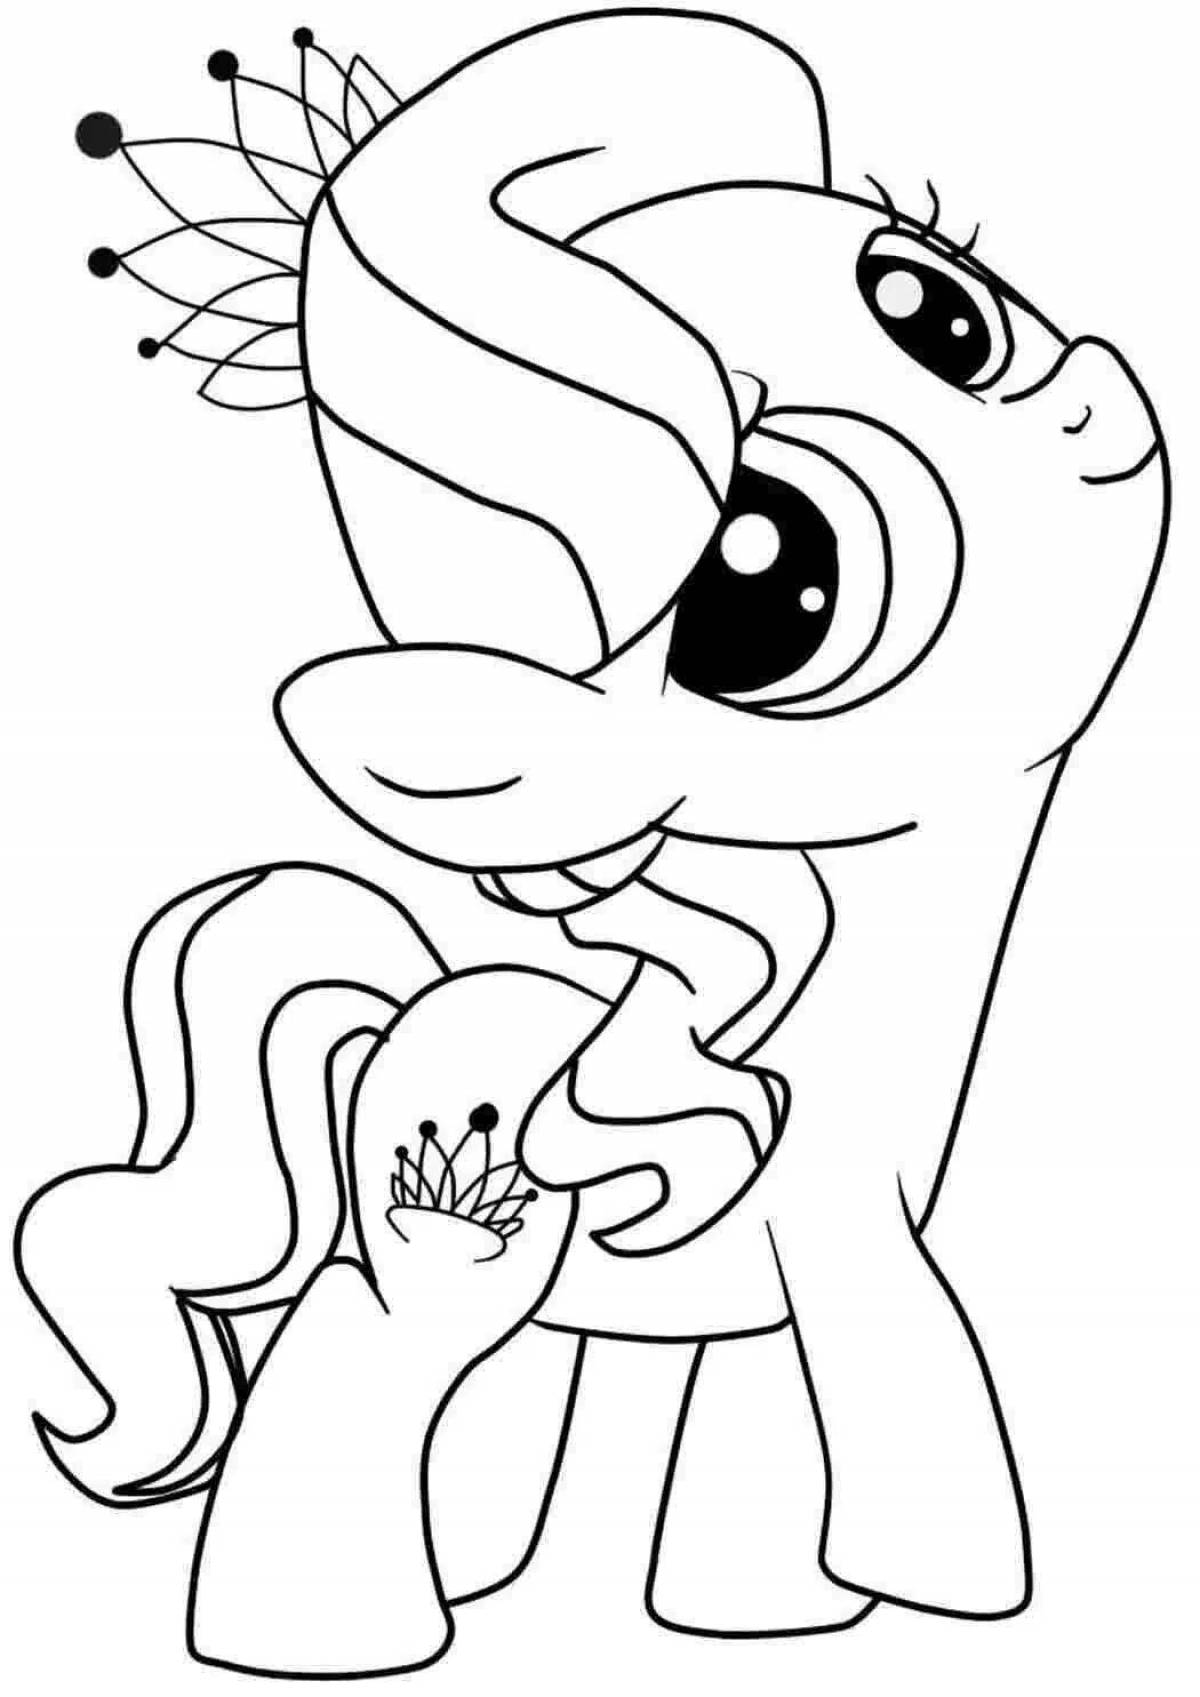 Coloring page happy pony for kids